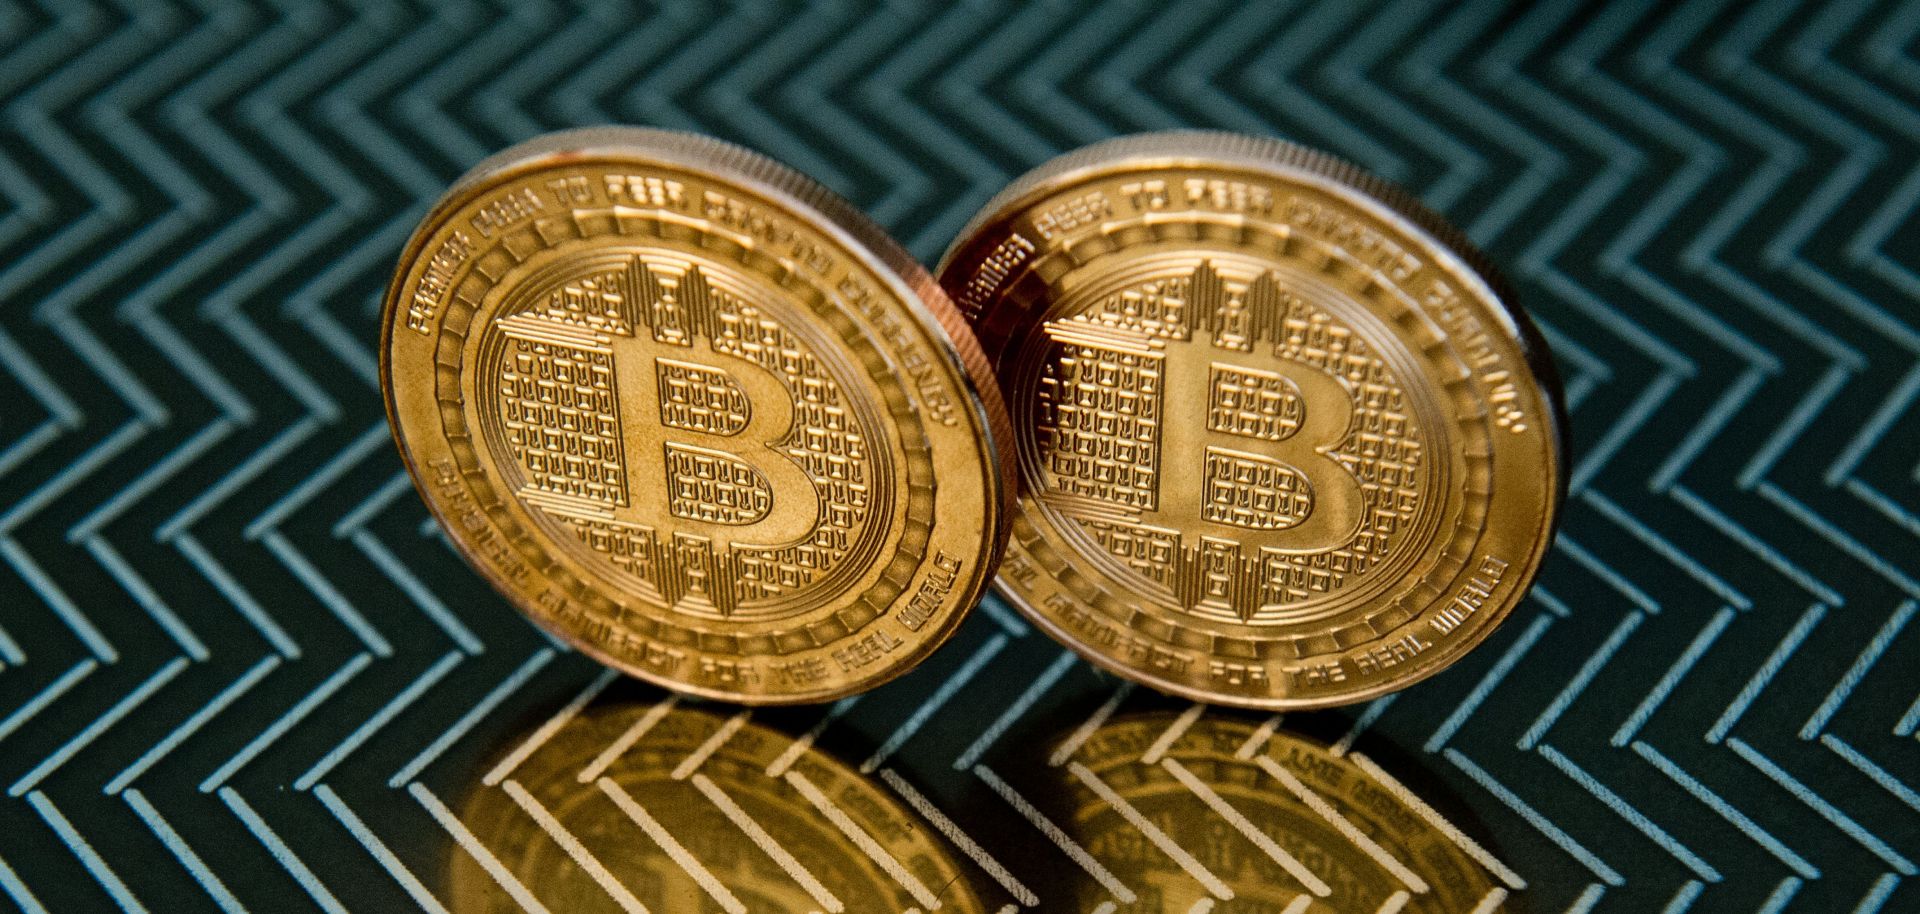 A pair of physical bitcoins, but the blockchain technology that powers the currency is far more important.